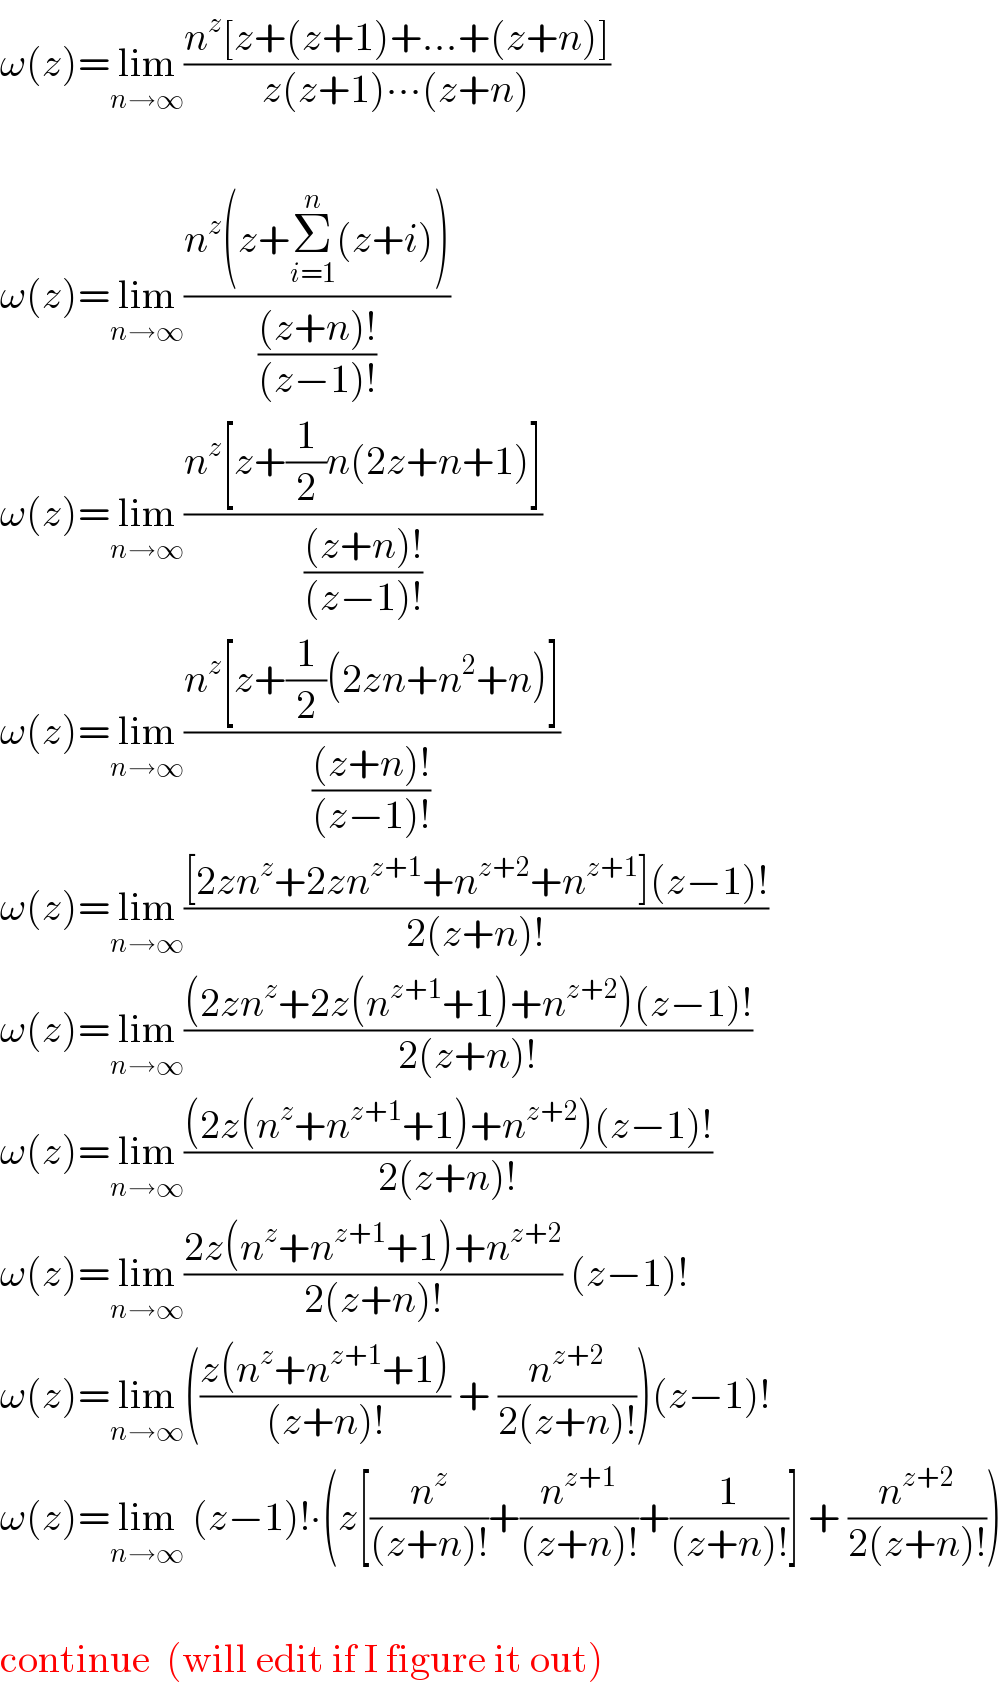 ω(z)=lim_(n→∞) ((n^z [z+(z+1)+...+(z+n)])/(z(z+1)∙∙∙(z+n)))    ω(z)=lim_(n→∞) ((n^z (z+Σ_(i=1) ^n (z+i)))/(((z+n)!)/((z−1)!)))  ω(z)=lim_(n→∞) ((n^z [z+(1/2)n(2z+n+1)])/(((z+n)!)/((z−1)!)))  ω(z)=lim_(n→∞) ((n^z [z+(1/2)(2zn+n^2 +n)])/(((z+n)!)/((z−1)!)))  ω(z)=lim_(n→∞) (([2zn^z +2zn^(z+1) +n^(z+2) +n^(z+1) ](z−1)!)/(2(z+n)!))  ω(z)=lim_(n→∞) (((2zn^z +2z(n^(z+1) +1)+n^(z+2) )(z−1)!)/(2(z+n)!))  ω(z)=lim_(n→∞) (((2z(n^z +n^(z+1) +1)+n^(z+2) )(z−1)!)/(2(z+n)!))  ω(z)=lim_(n→∞) ((2z(n^z +n^(z+1) +1)+n^(z+2) )/(2(z+n)!)) (z−1)!  ω(z)=lim_(n→∞) (((z(n^z +n^(z+1) +1))/((z+n)!)) + (n^(z+2) /(2(z+n)!)))(z−1)!  ω(z)=lim_(n→∞)  (z−1)!∙(z[(n^z /((z+n)!))+(n^(z+1) /((z+n)!))+(1/((z+n)!))] + (n^(z+2) /(2(z+n)!)))    continue  (will edit if I figure it out)  